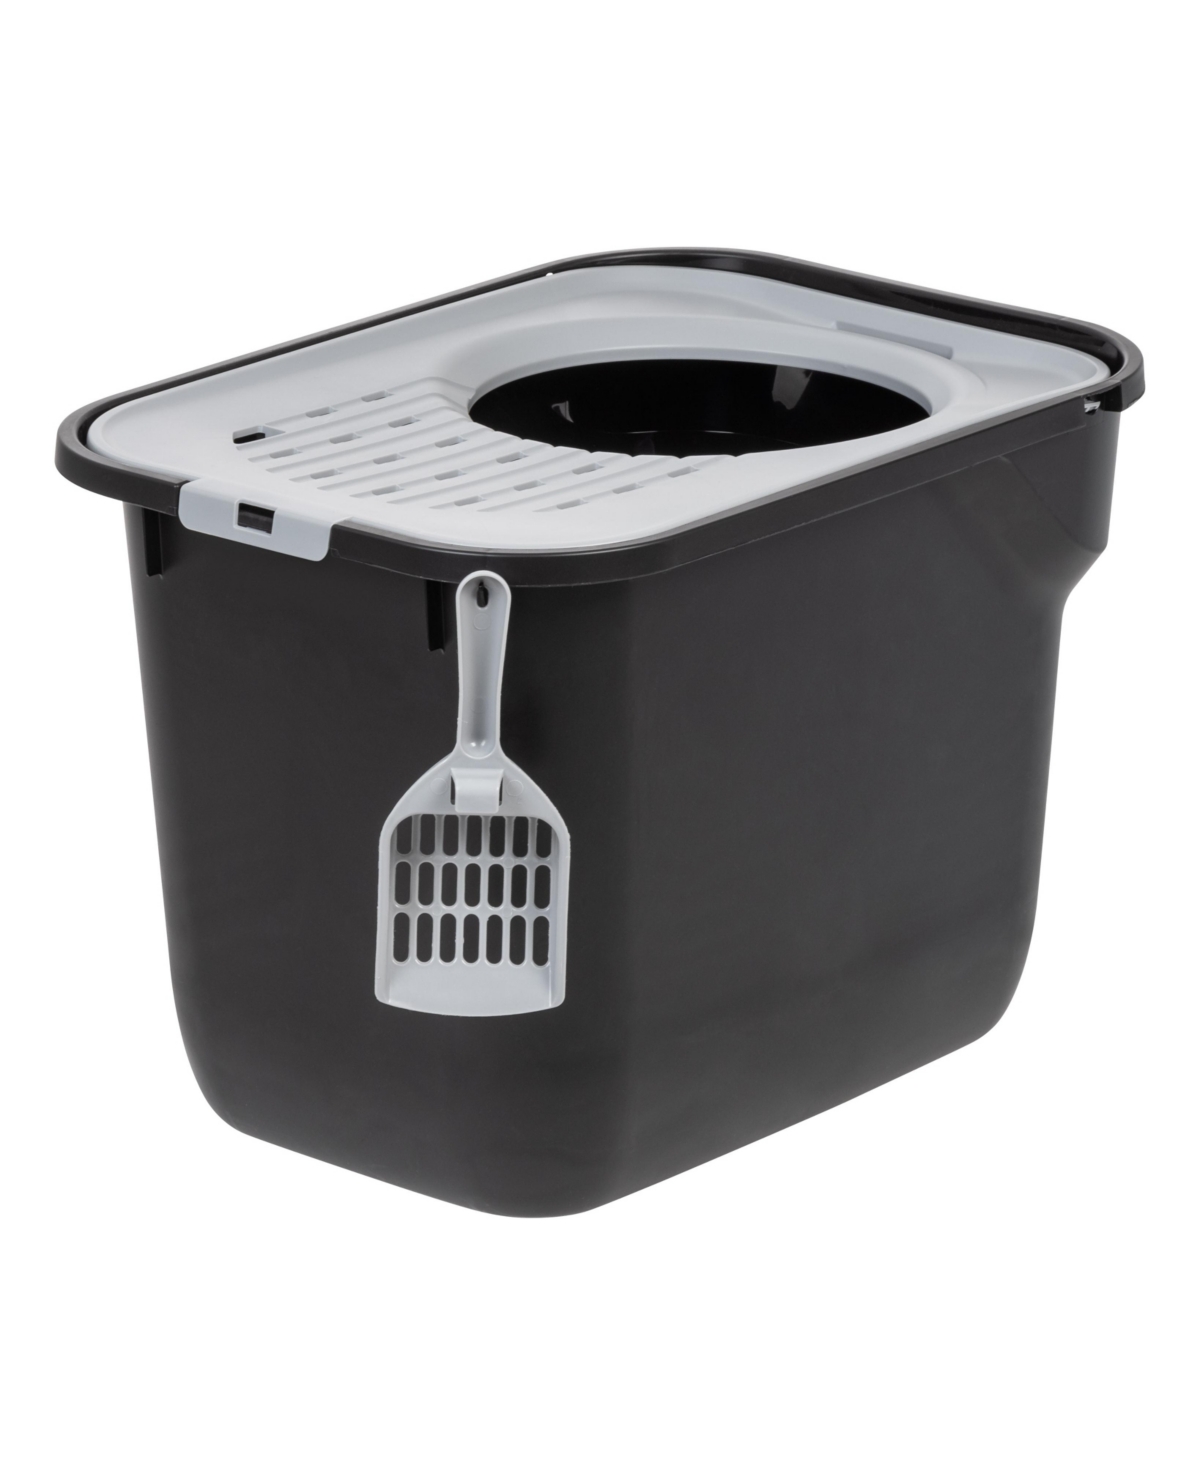 Top Entry Cat Litter Box with Scoop, Black - Black